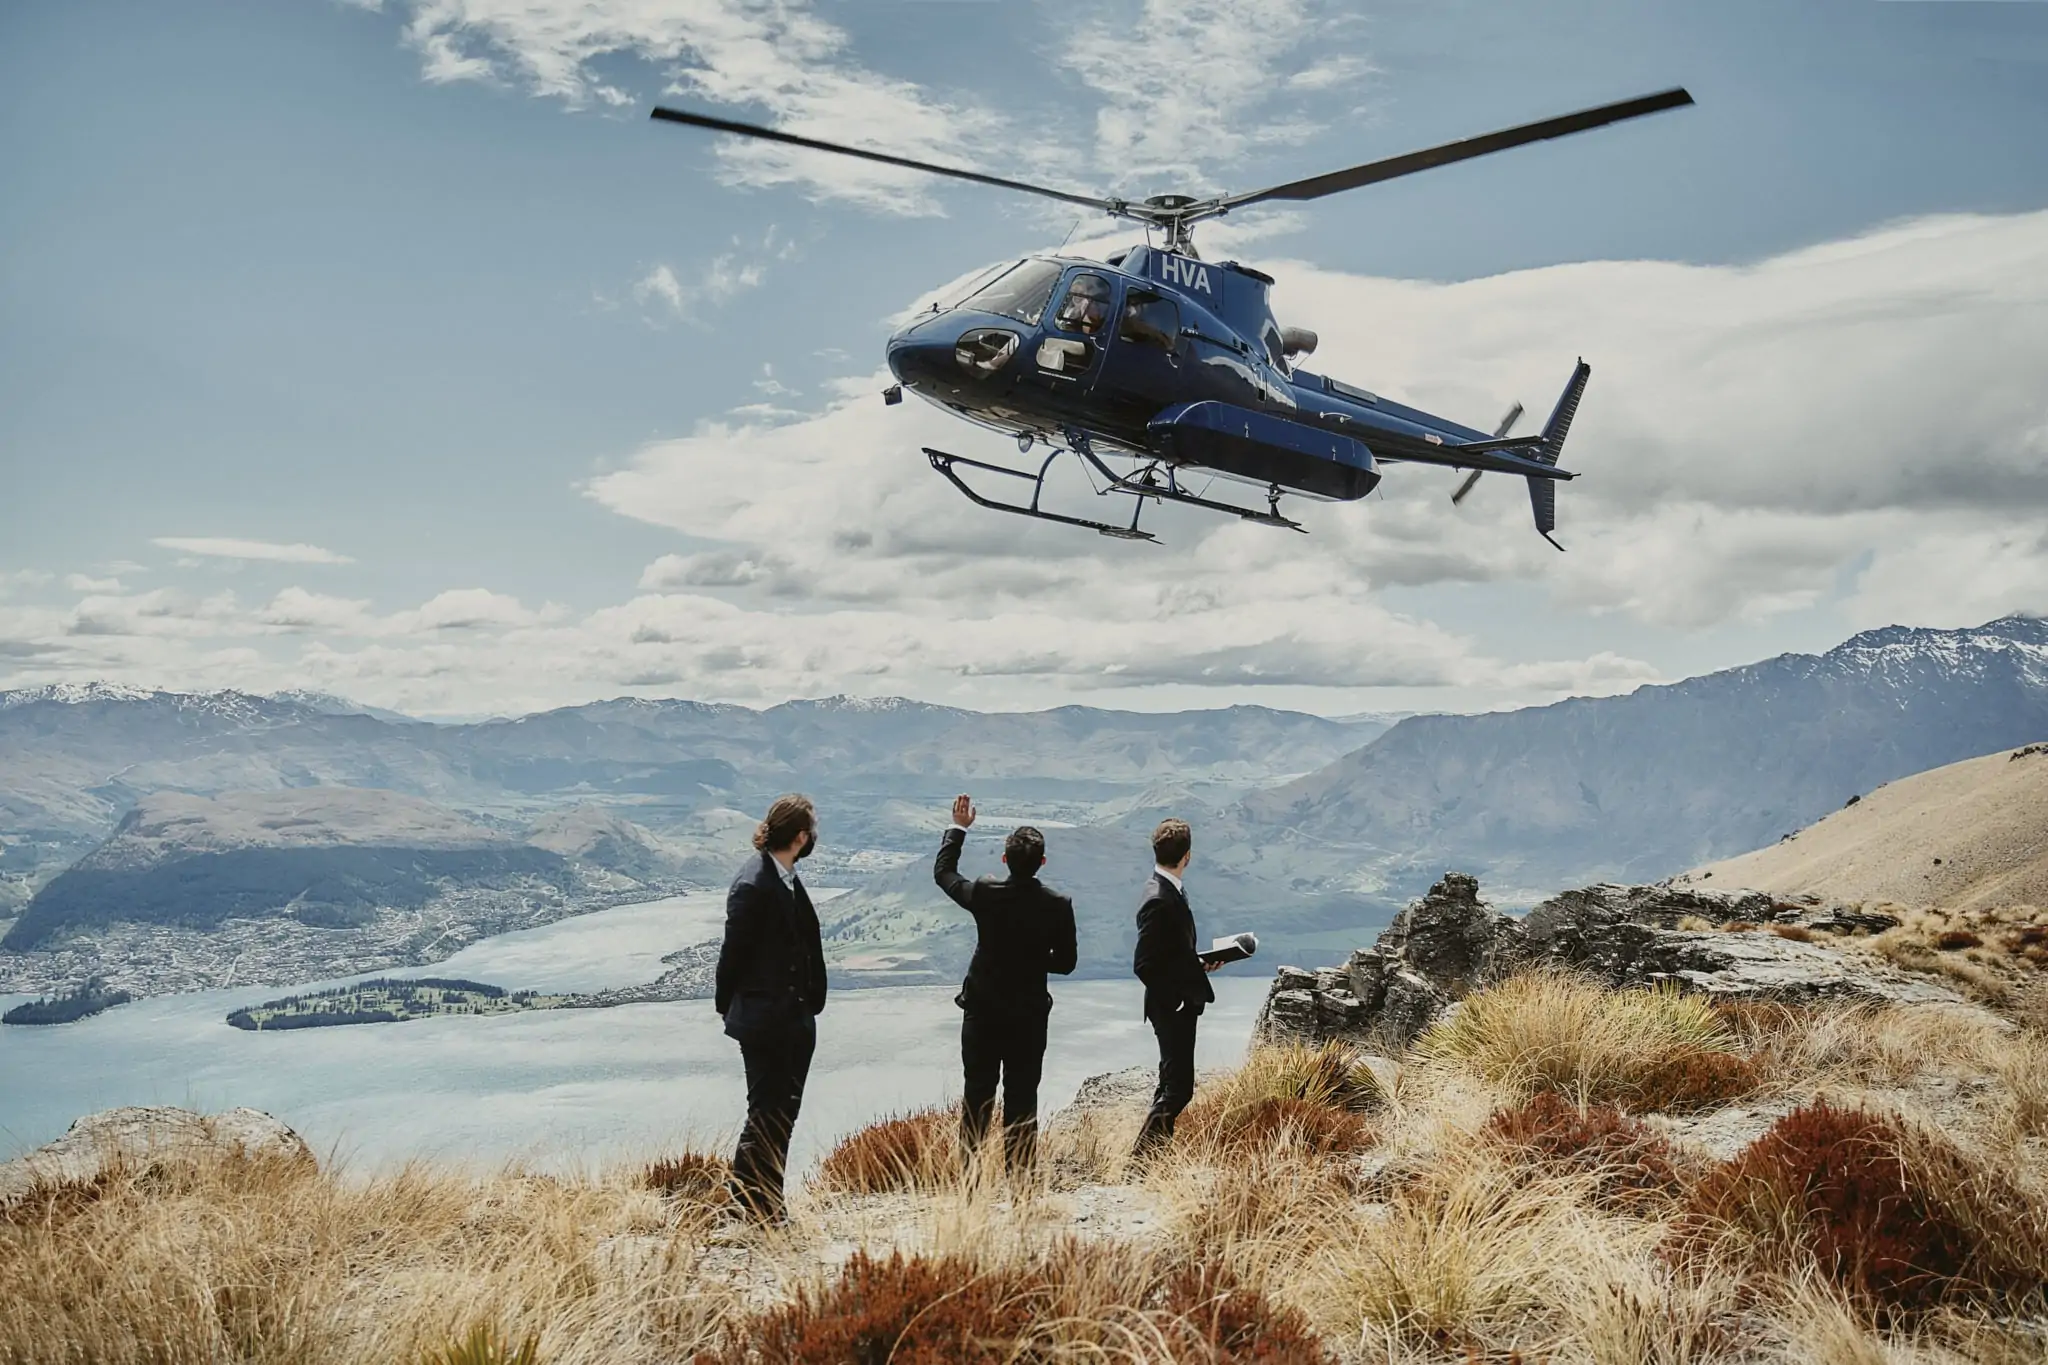 A helicopter safely hovers over a group of people on top of a mountain.